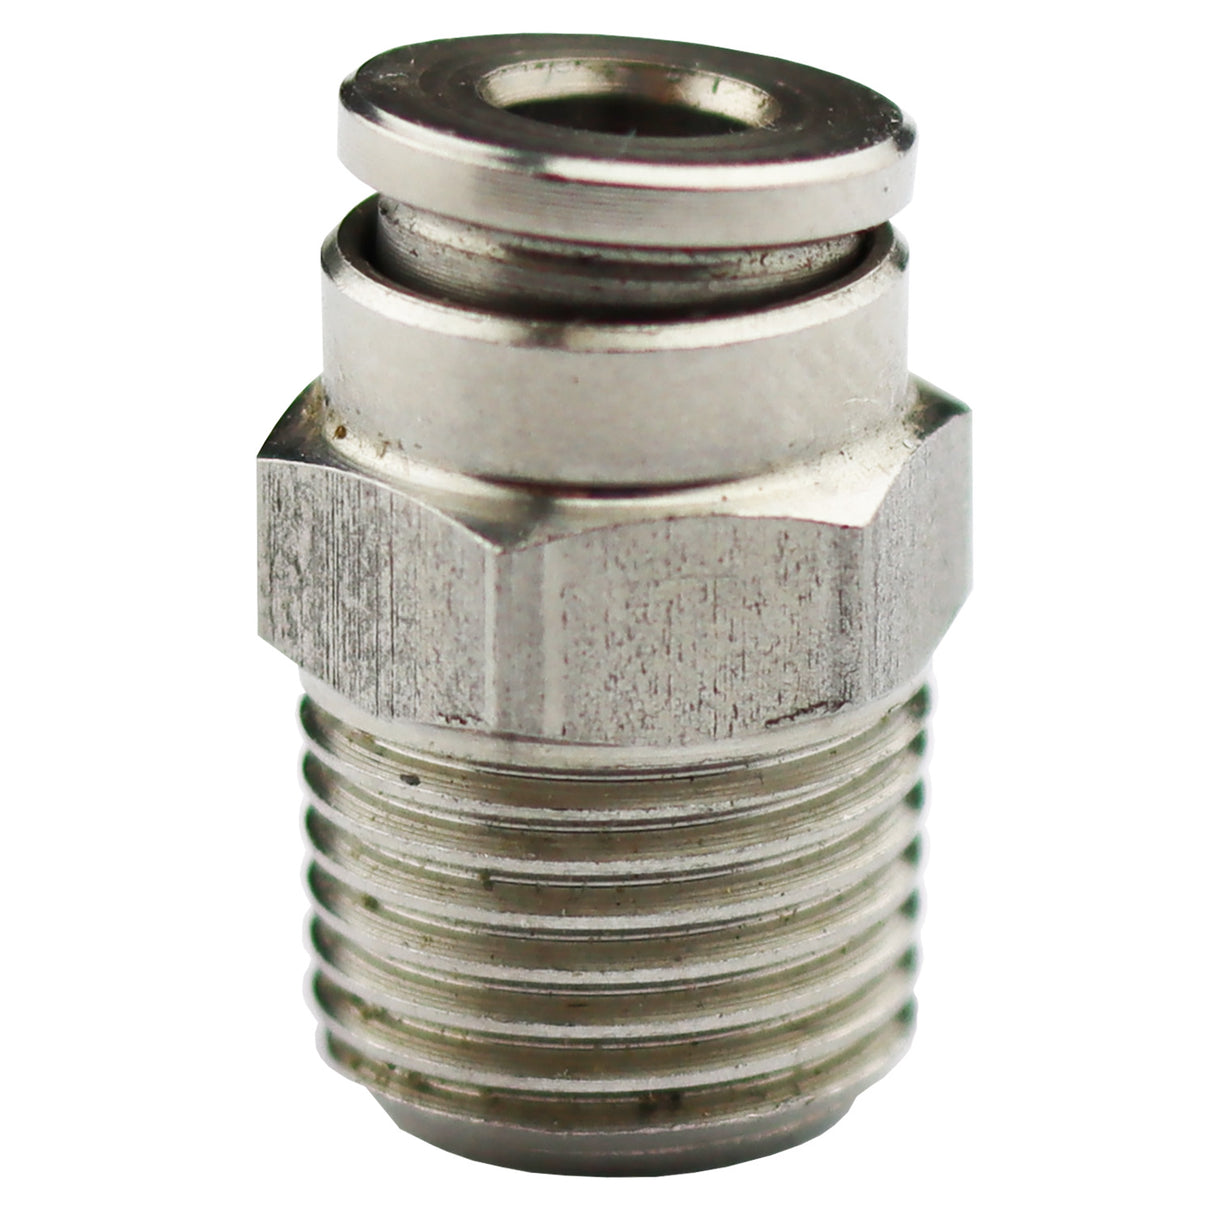 Compressed air fitting Stainless Steel Straight Push In Fitting with Hexagon R 1/8" x 4